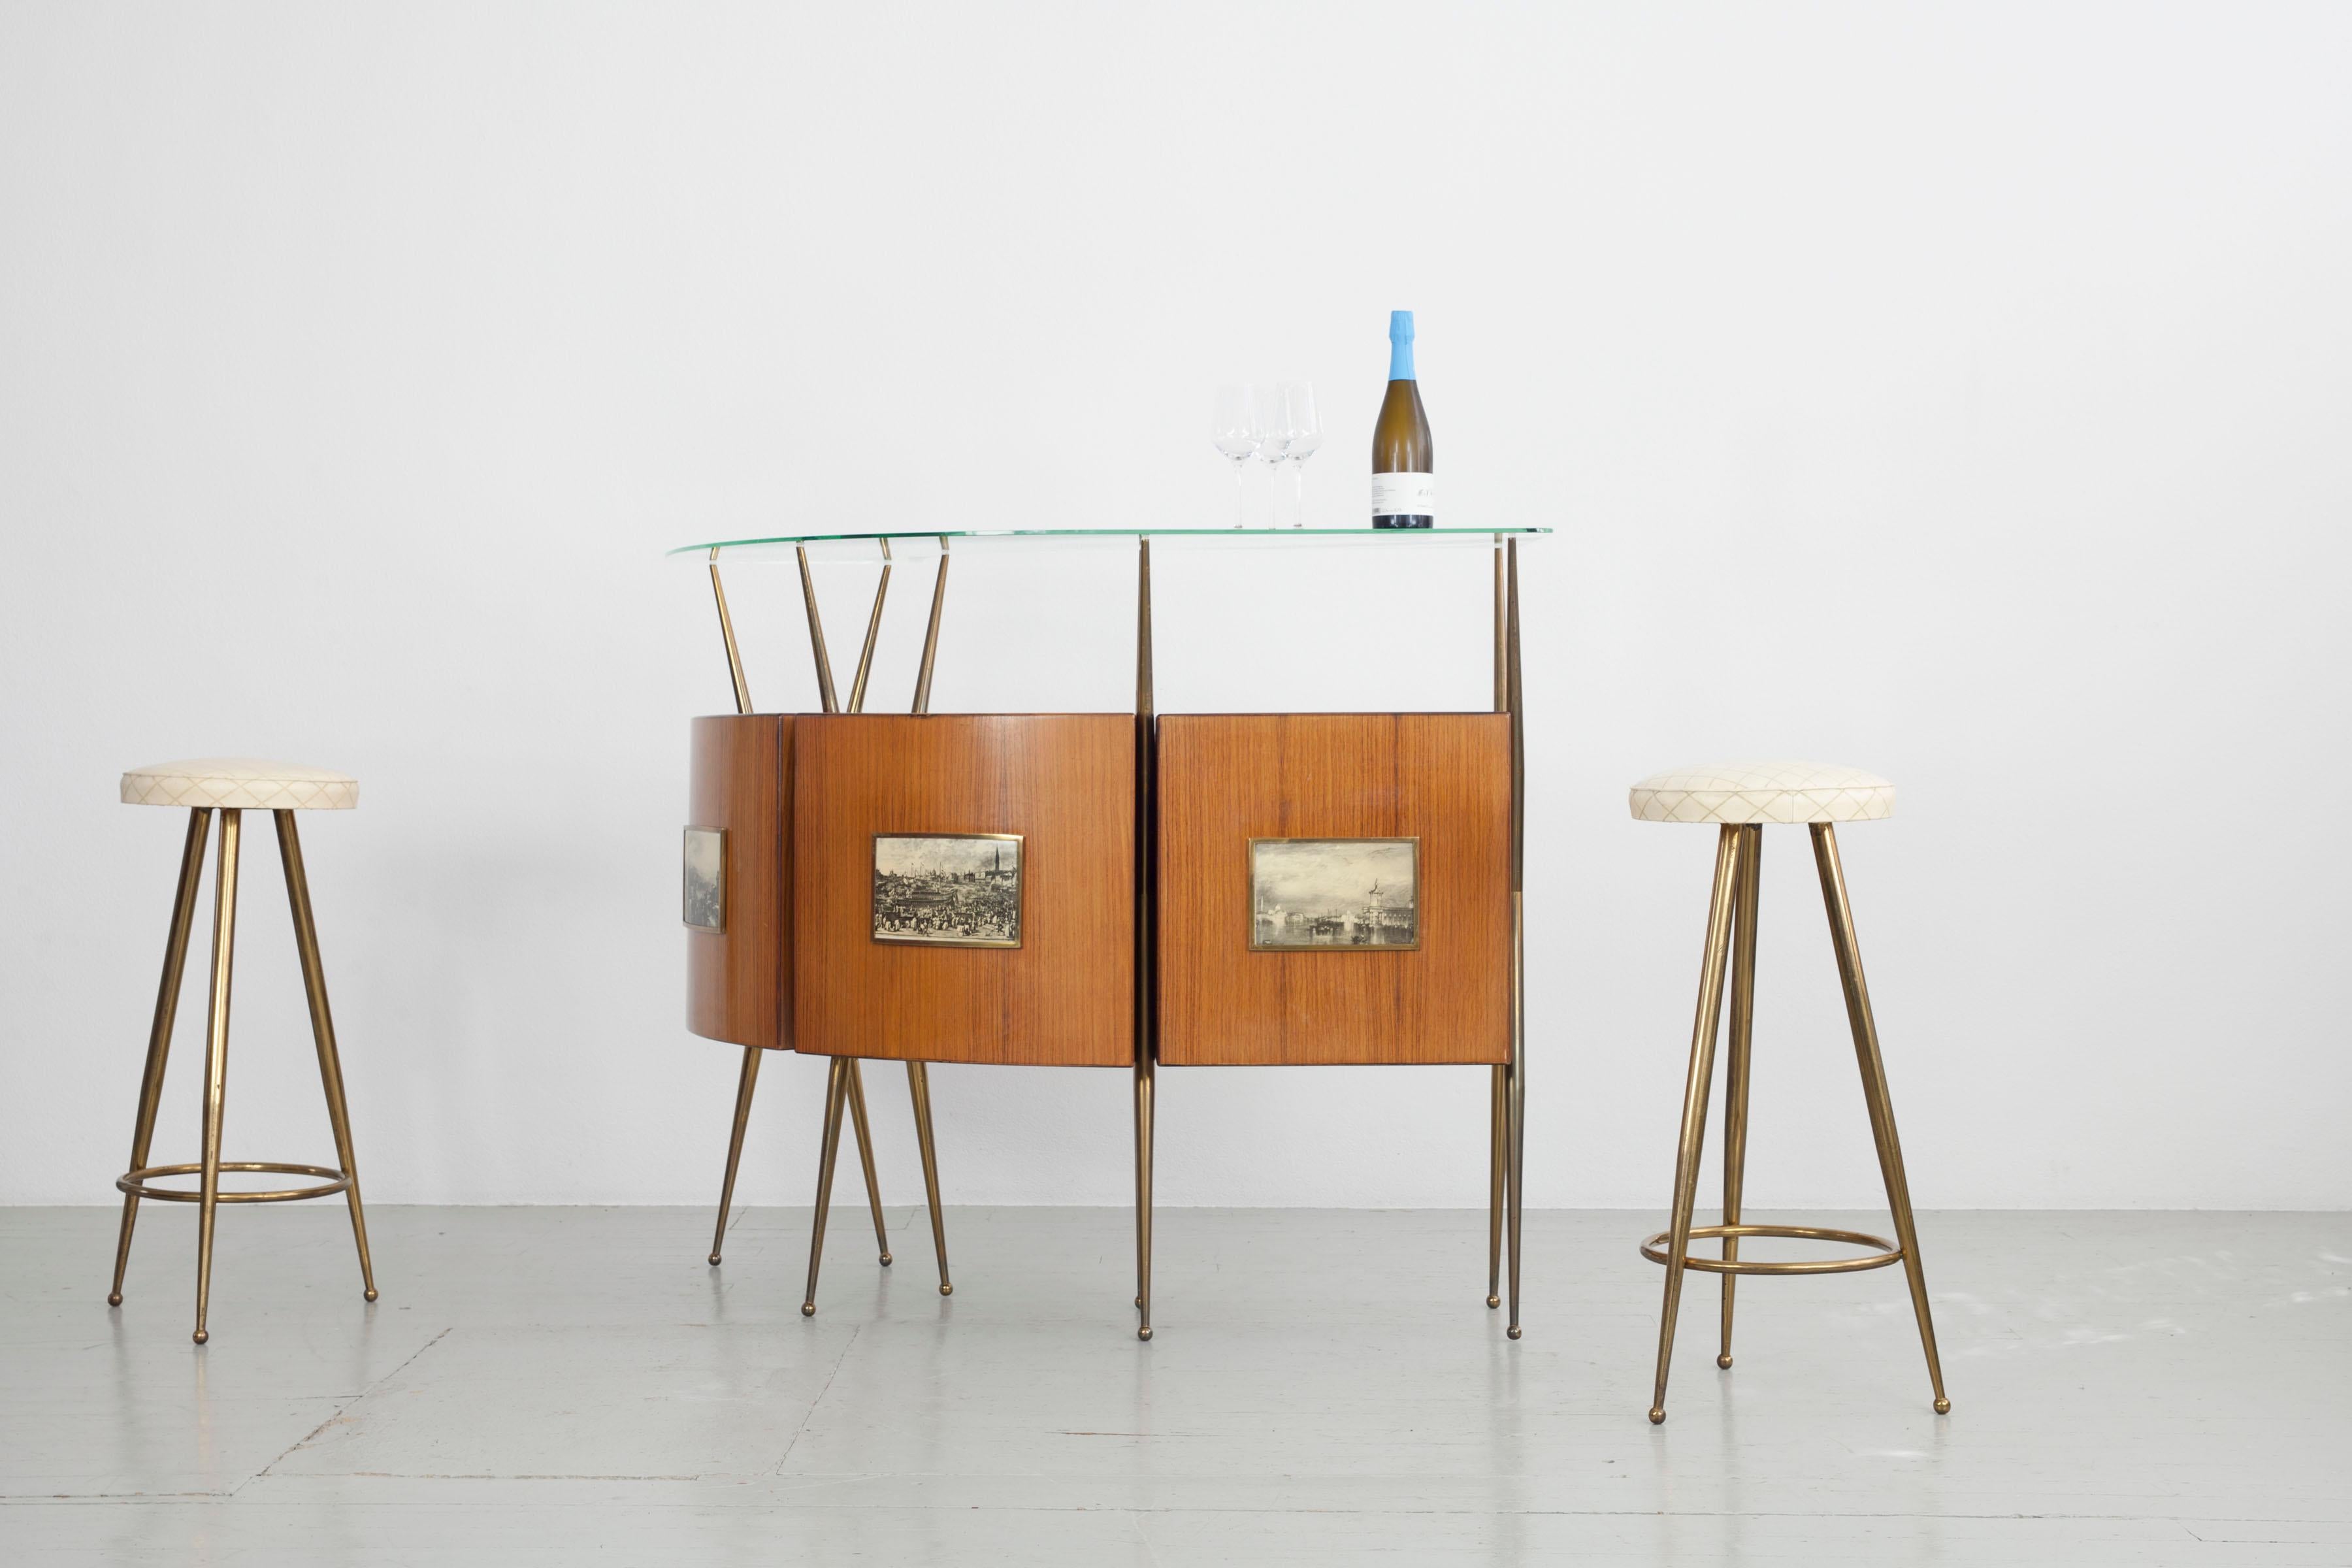 Italian 1950s home bar with bar cabinet and stools. This stylish mid-century bar has a beautiful curve in the rosewood wood cabinets, which feature 3 black and white prints of Venice. The bar stands on brass legs and the glass top above is also